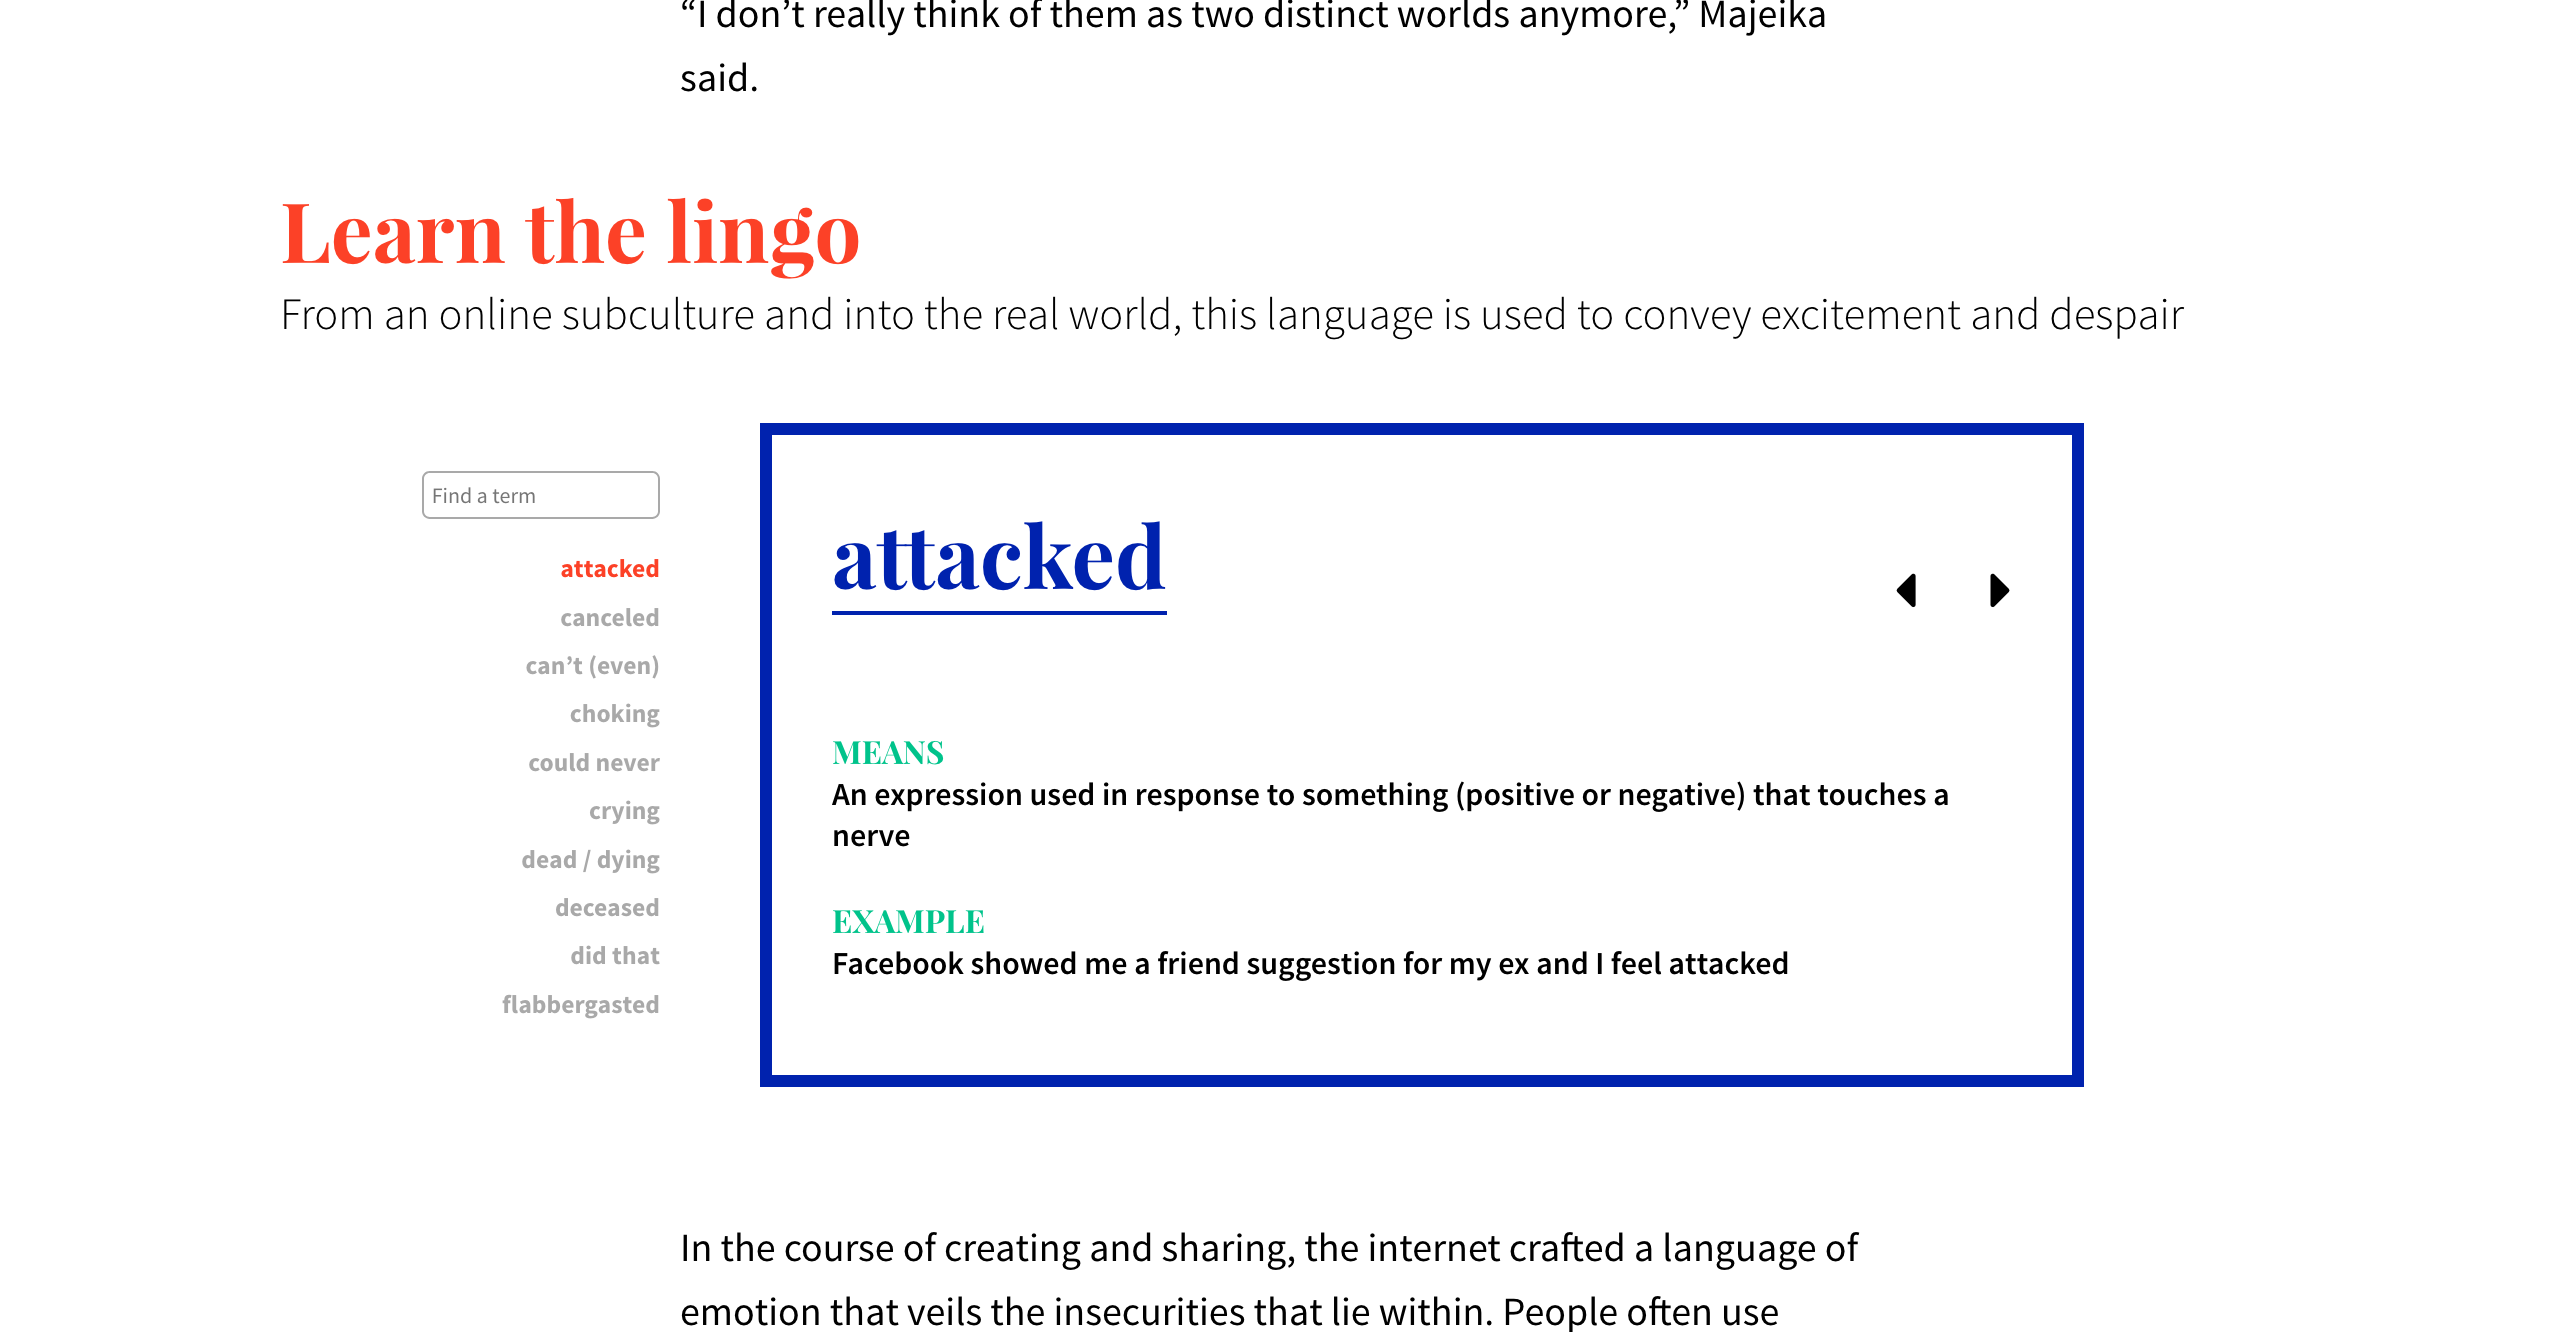 A screenshot of the “Learn the lingo” module on the Shook Beyond Words website. It enabled users to learn some internet lingo.